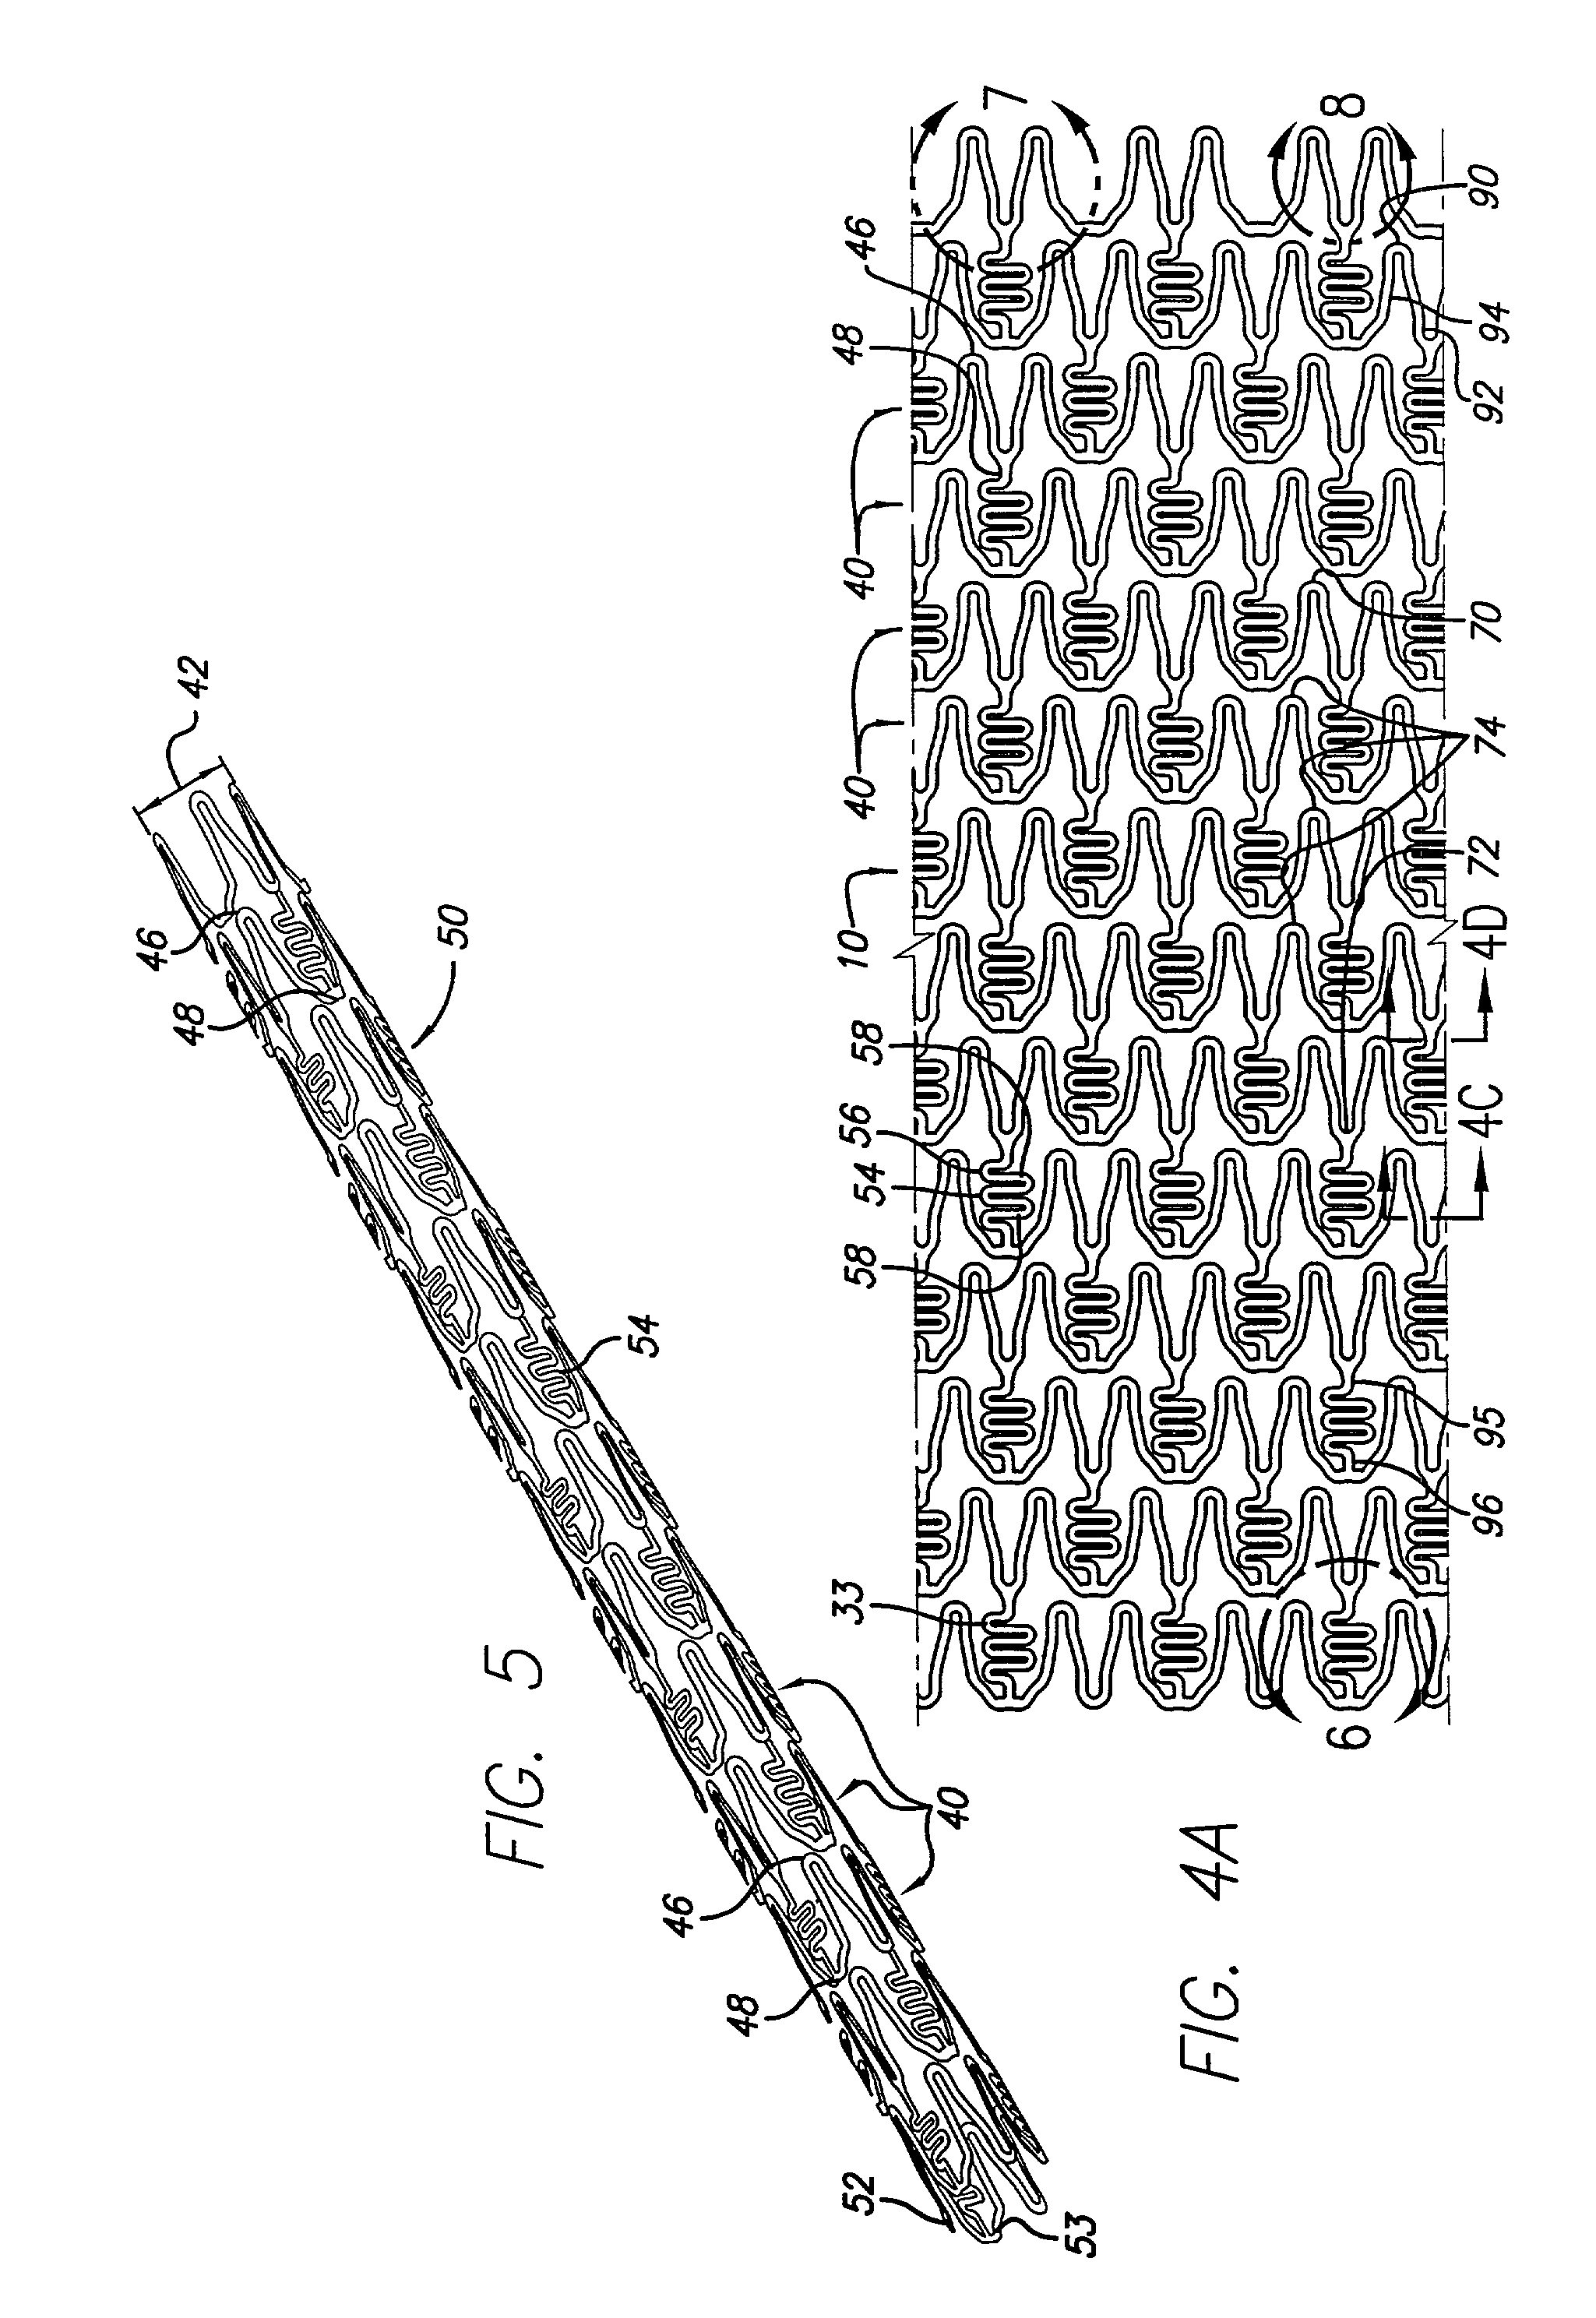 Hybrid stent and method of making